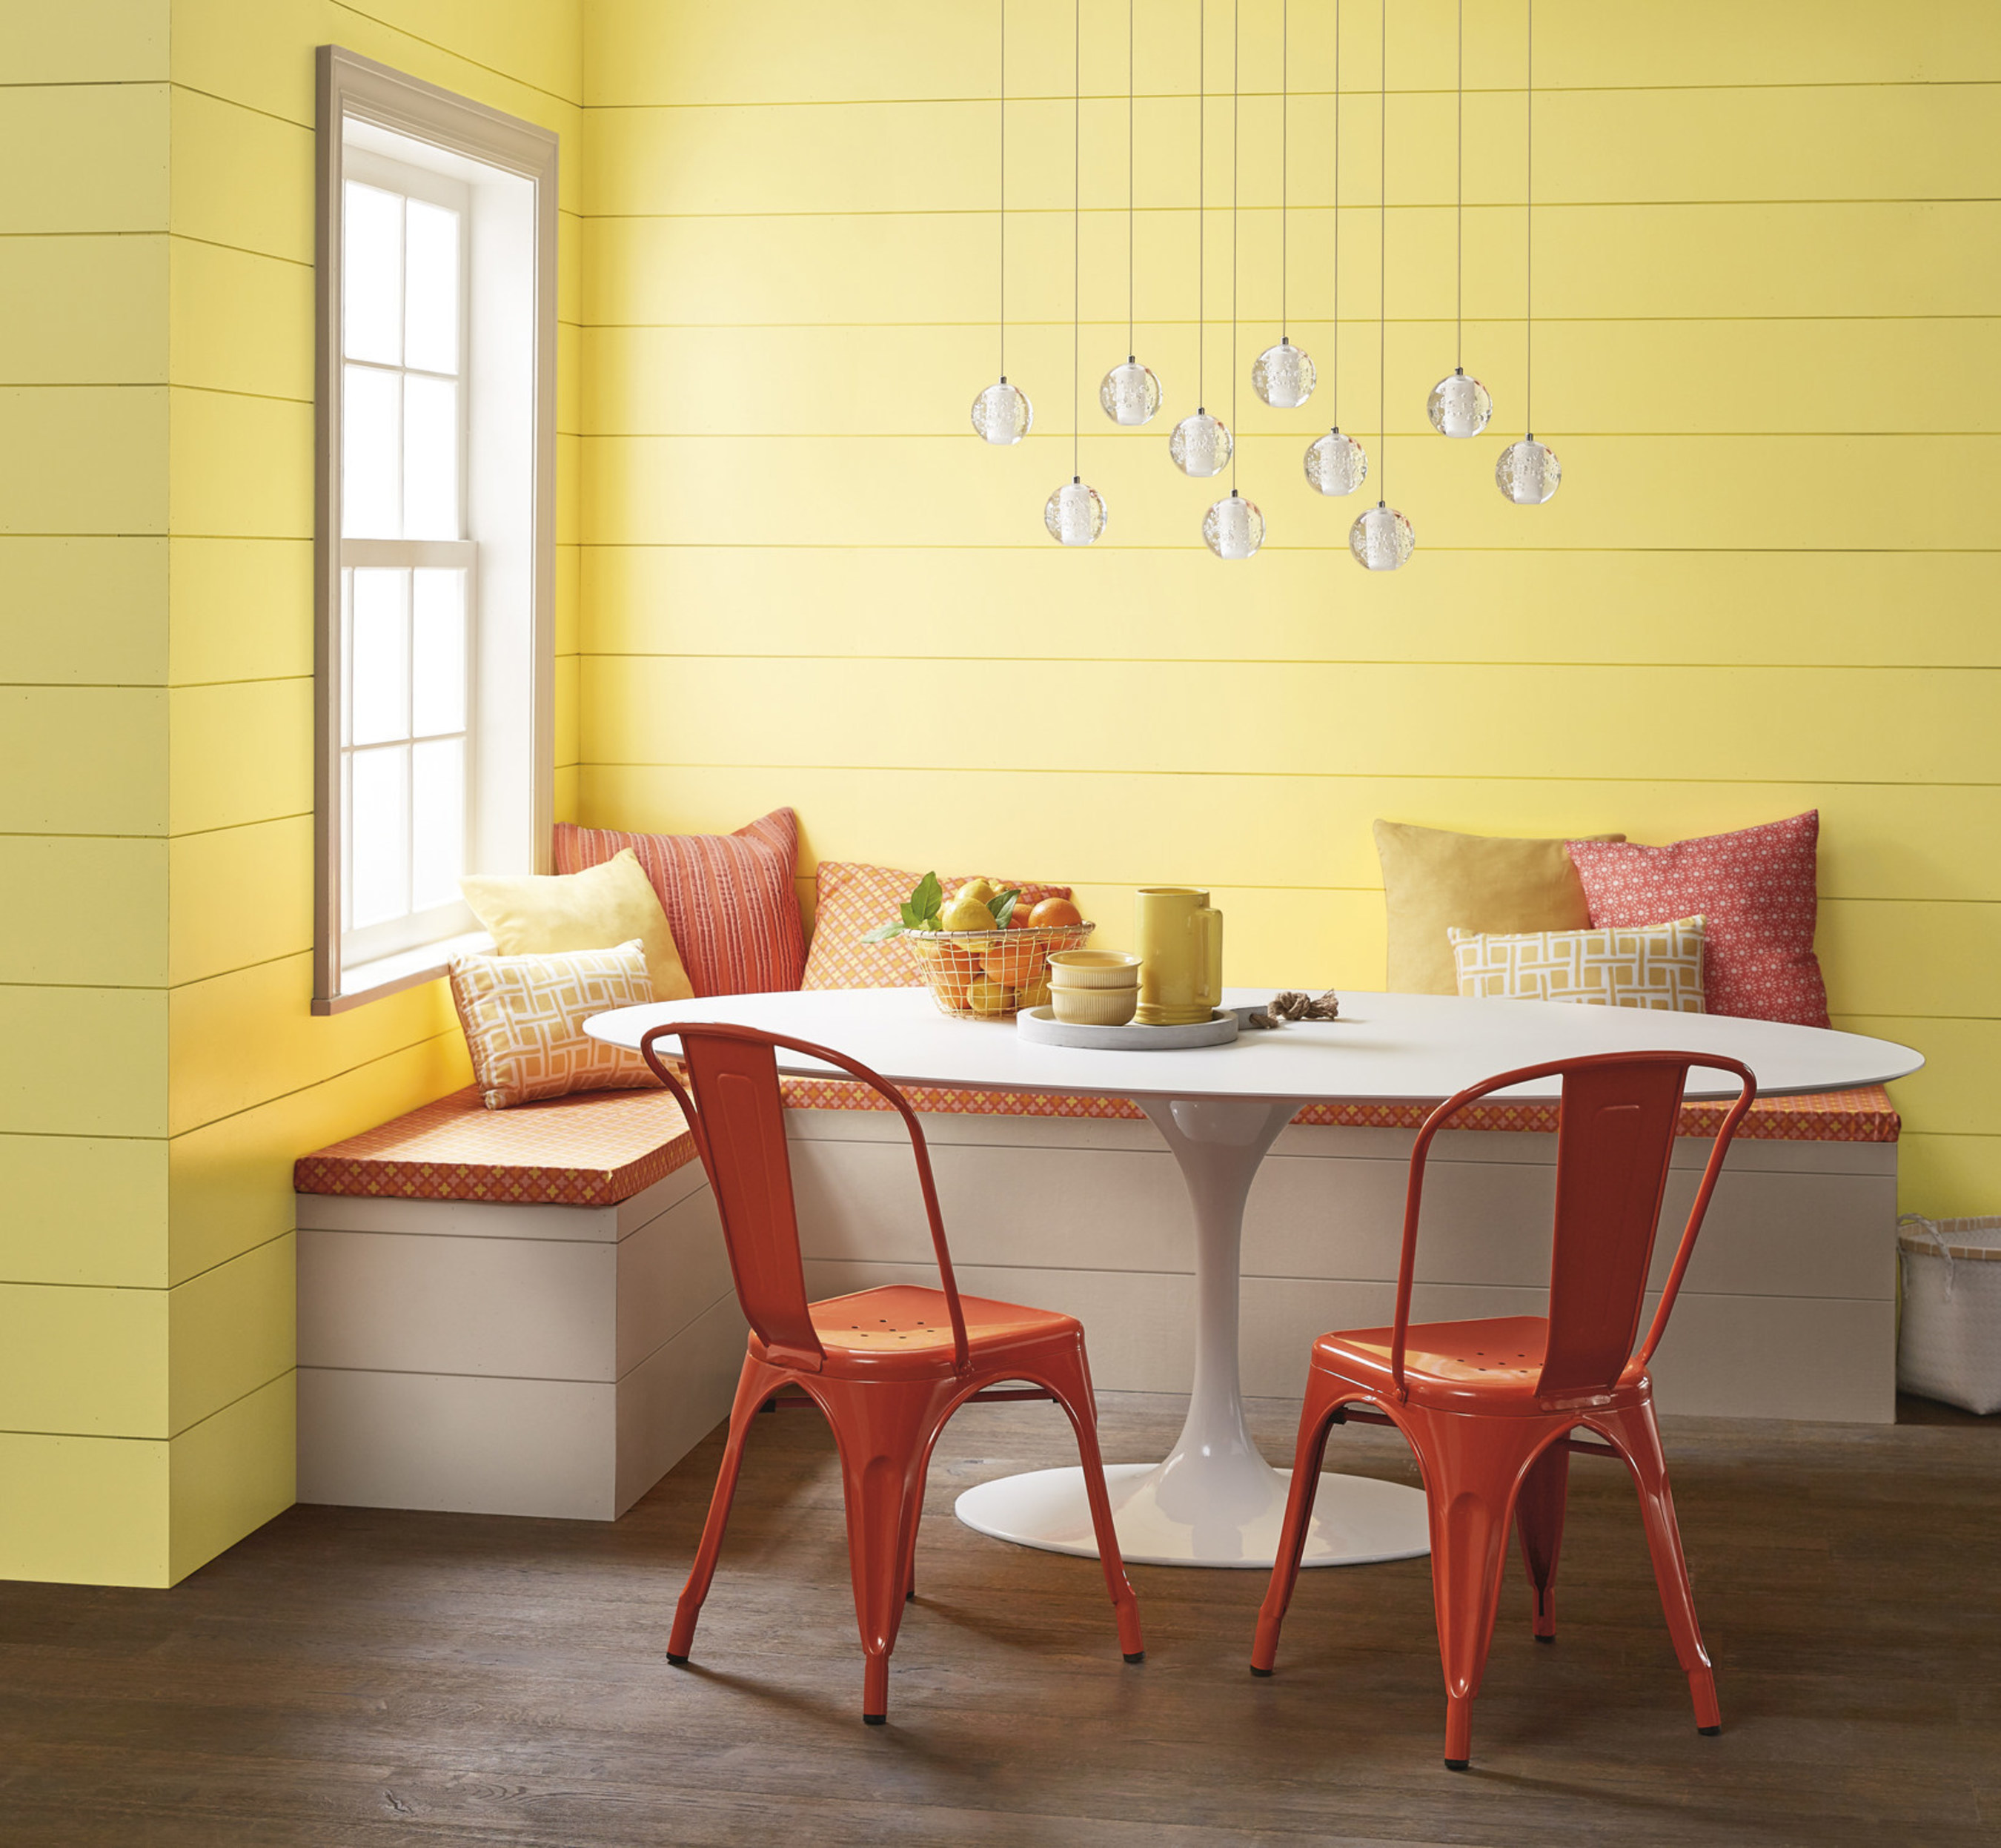 Lowe's: 3007-4B Daisy Spell/ Ace: VR042E Dear Melissa/ Independent Retailers: V054-1 Dear Melissa/ An airy, luminous yellow comes to light as new technological innovations elevate sensory stimulation. "This color can fill a room with light and awaken all five senses," said Kim.